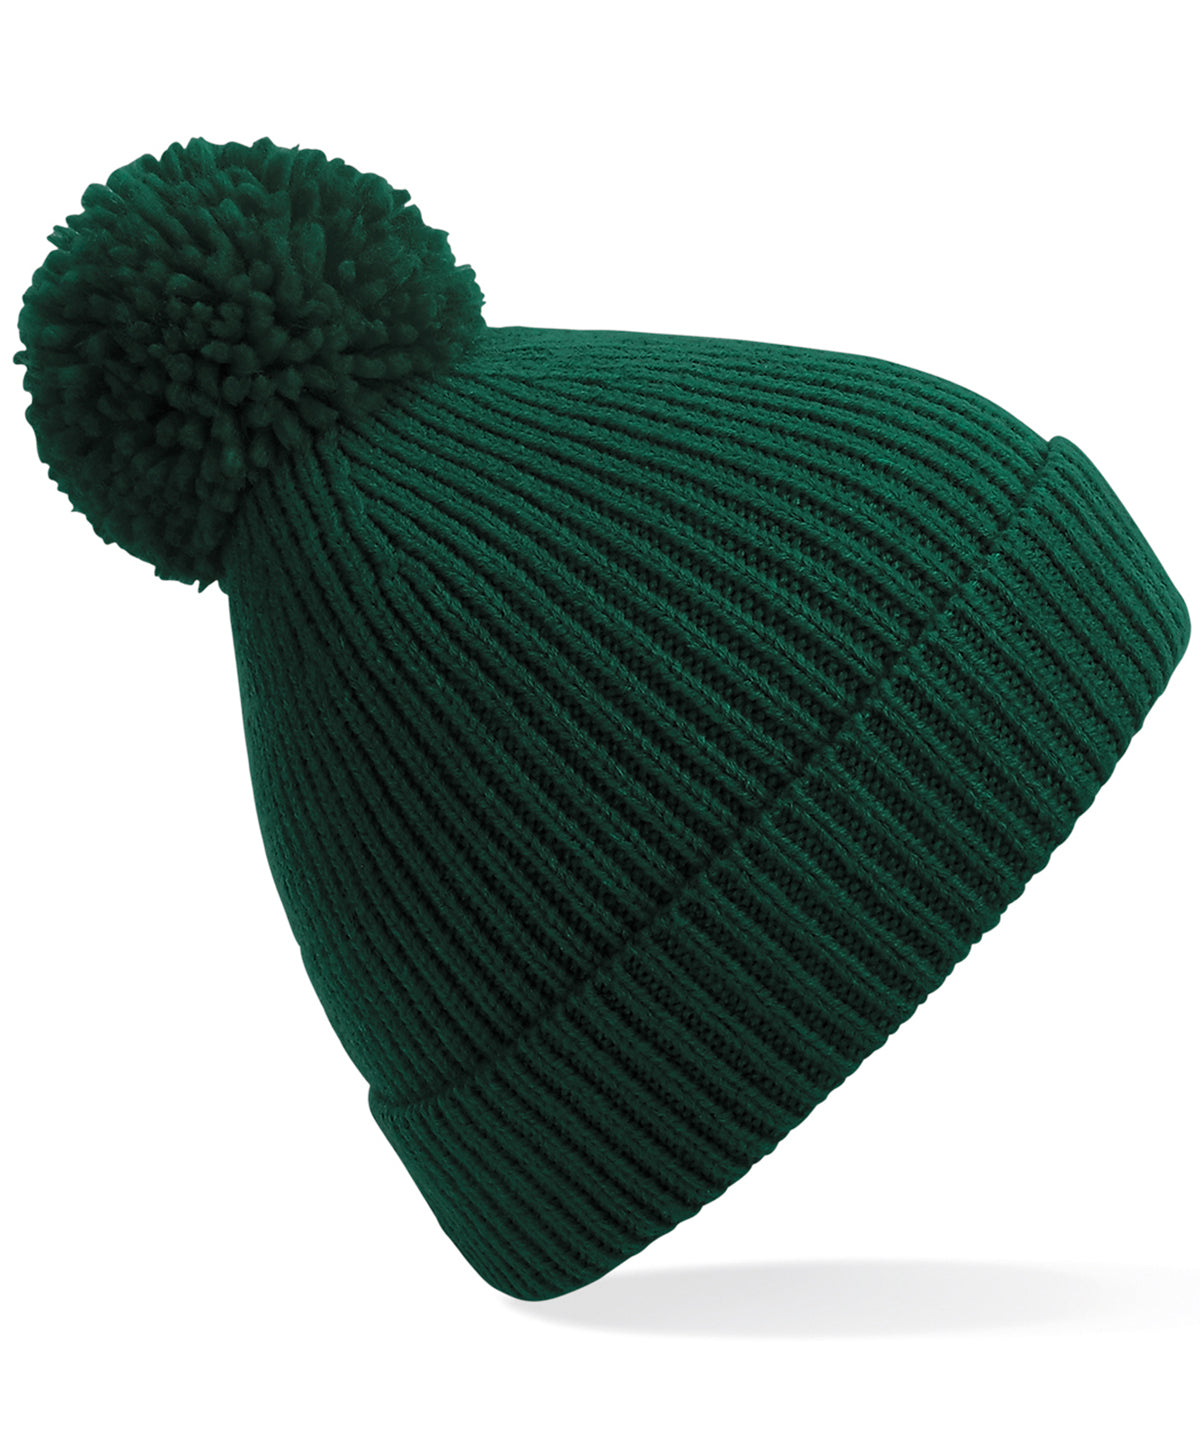 Personalised Hats - Bottle Beechfield Engineered knit ribbed pom pom beanie